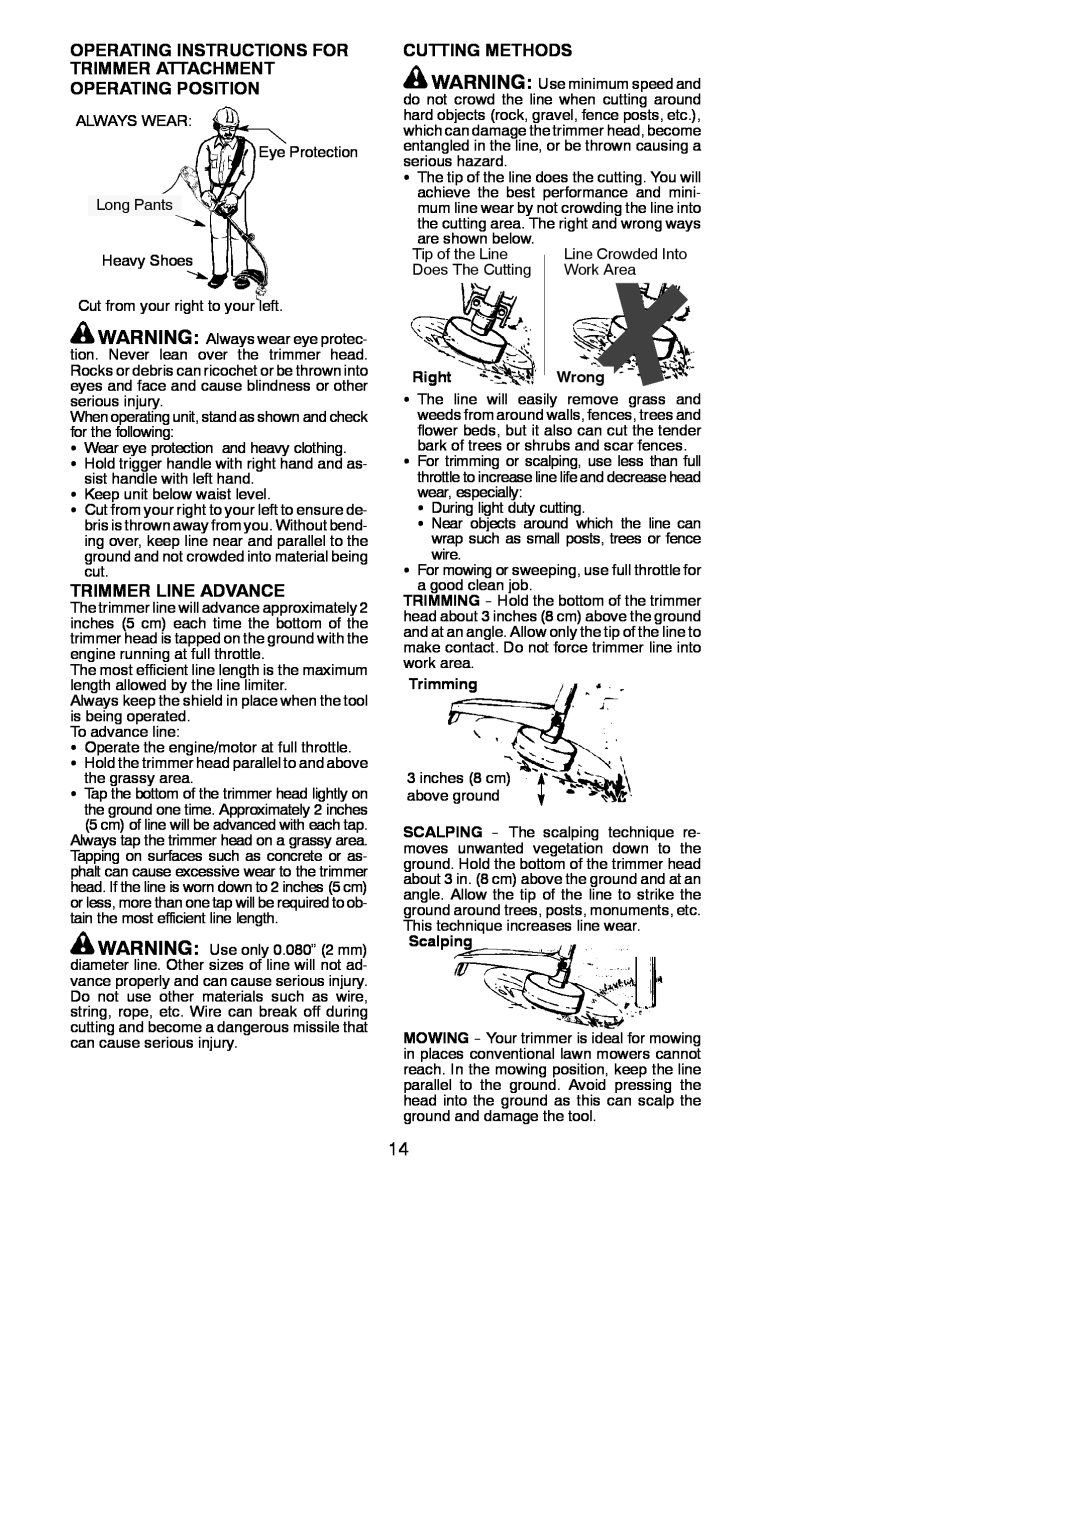 Poulan 810 EPT instruction manual Trimmer Line Advance, Cutting Methods, RightWrong, Trimming, Scalping 